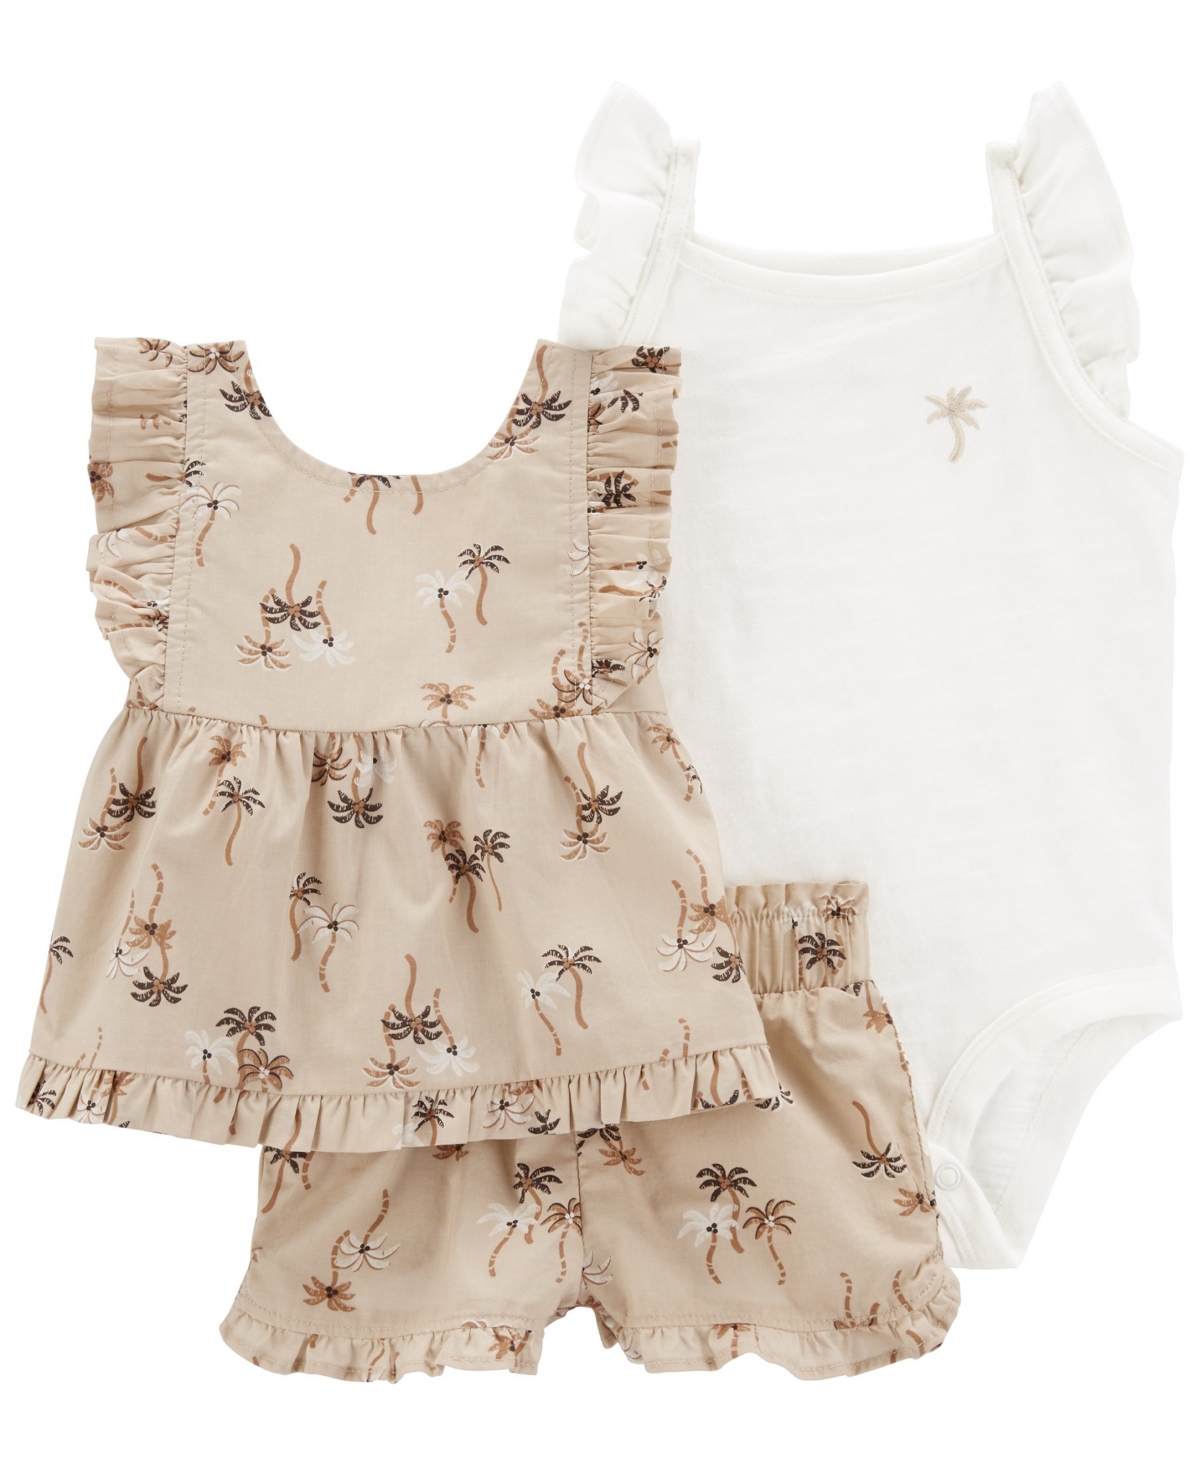 Carter's Baby Girls 3 Piece Palm Tree Outfit Set In Tan